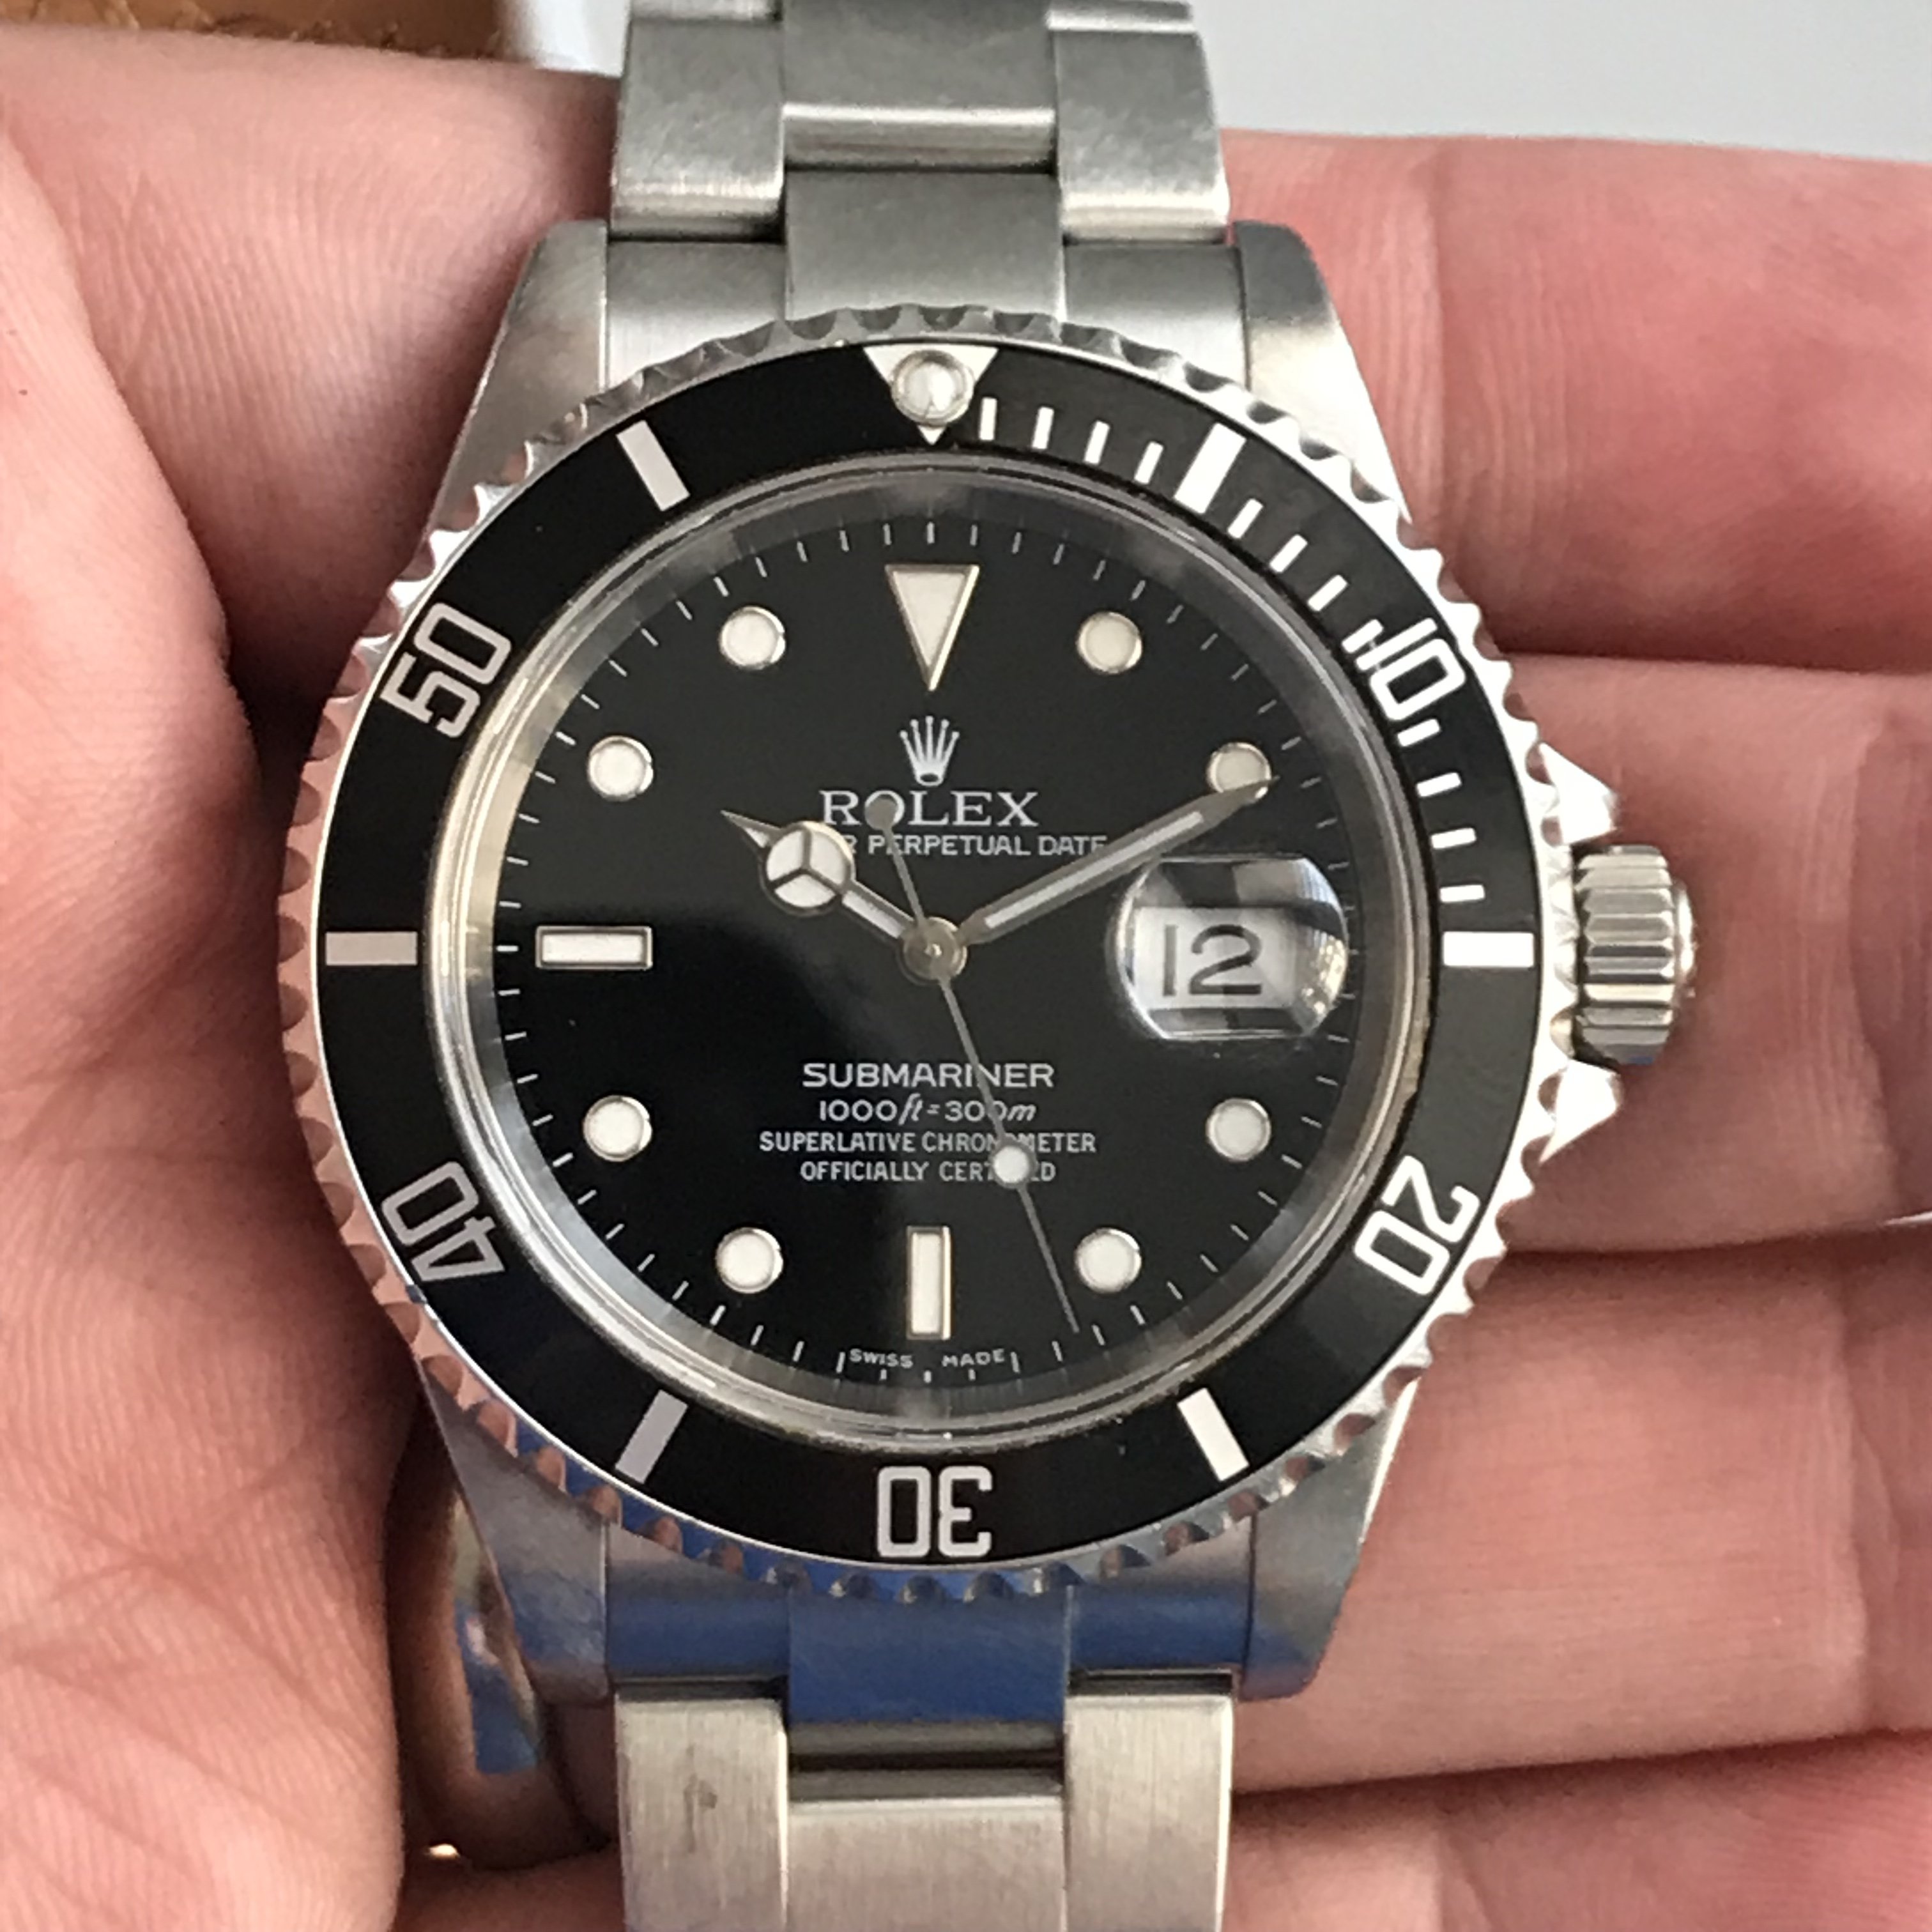 SOLD - Rolex 16610 T Submariner with 